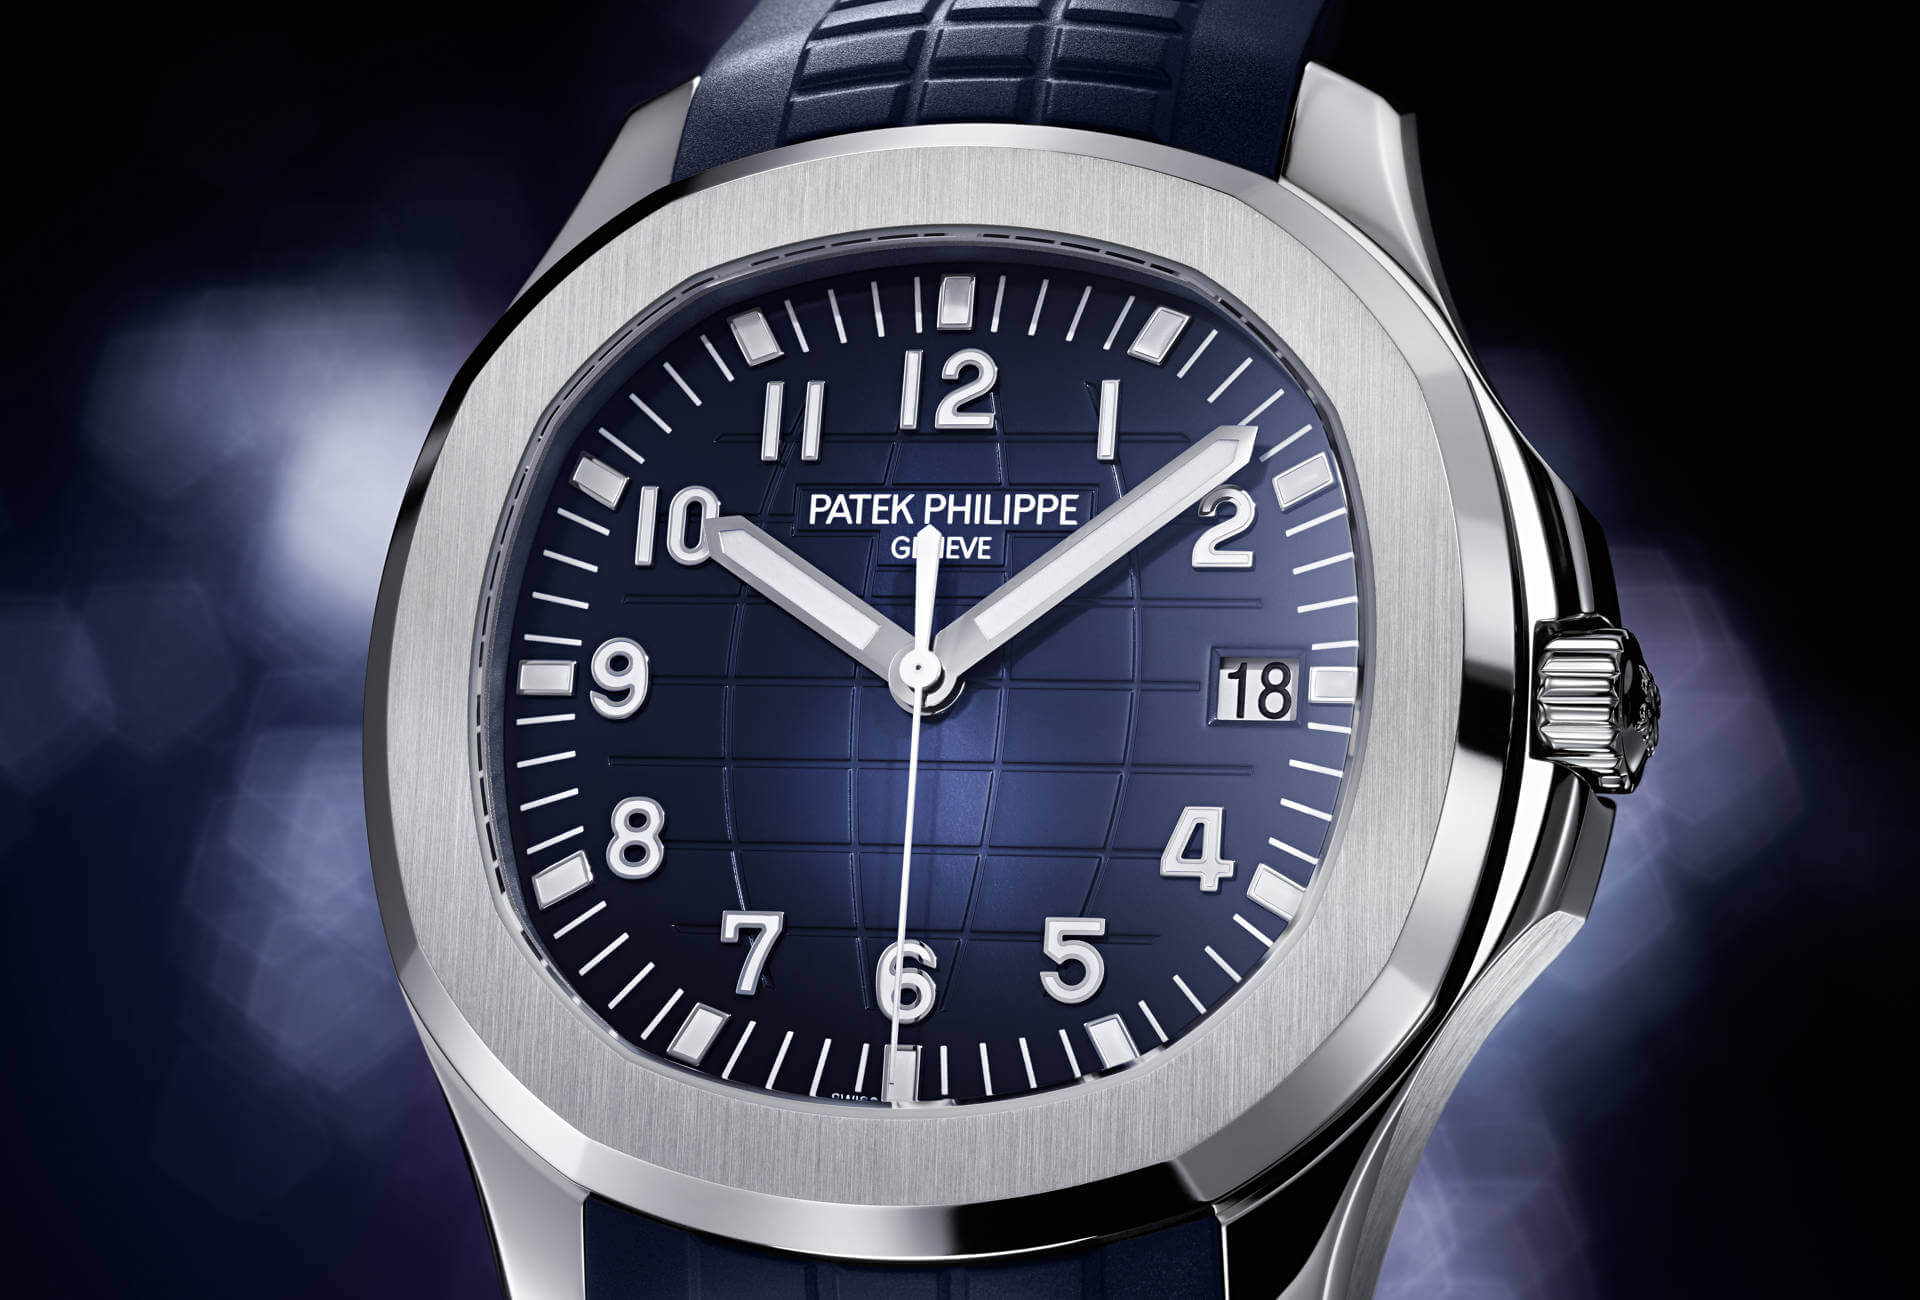 The Patek Philippe Aquanaut is a High-End Sports Watch Icon